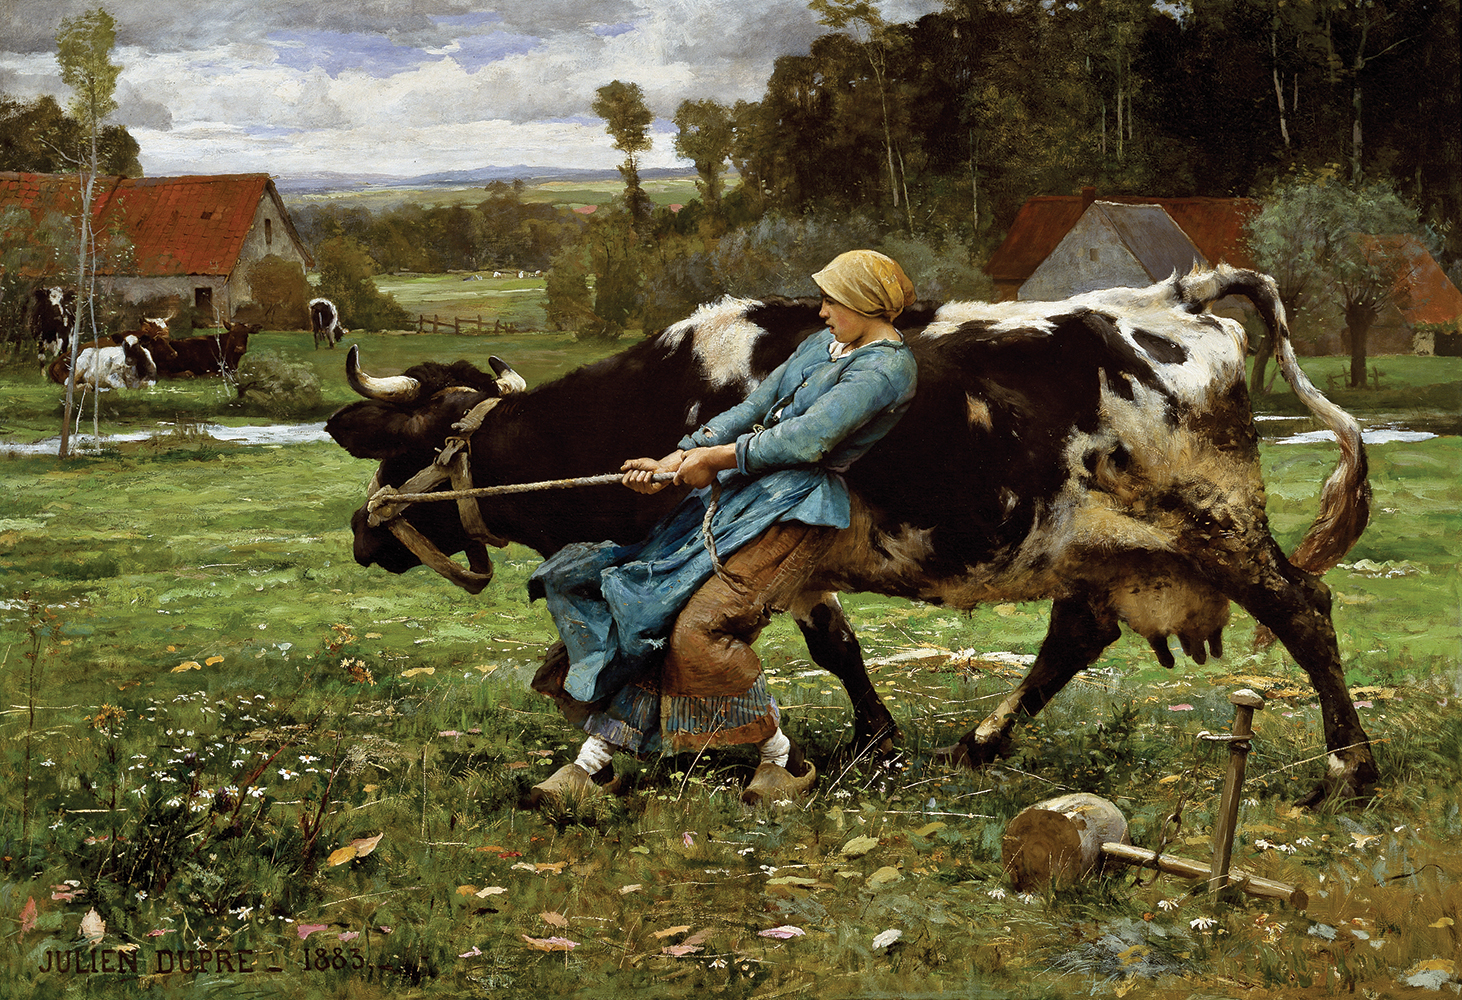 In the Pasture (also known as "The Milk Maid") - Julien Dupre